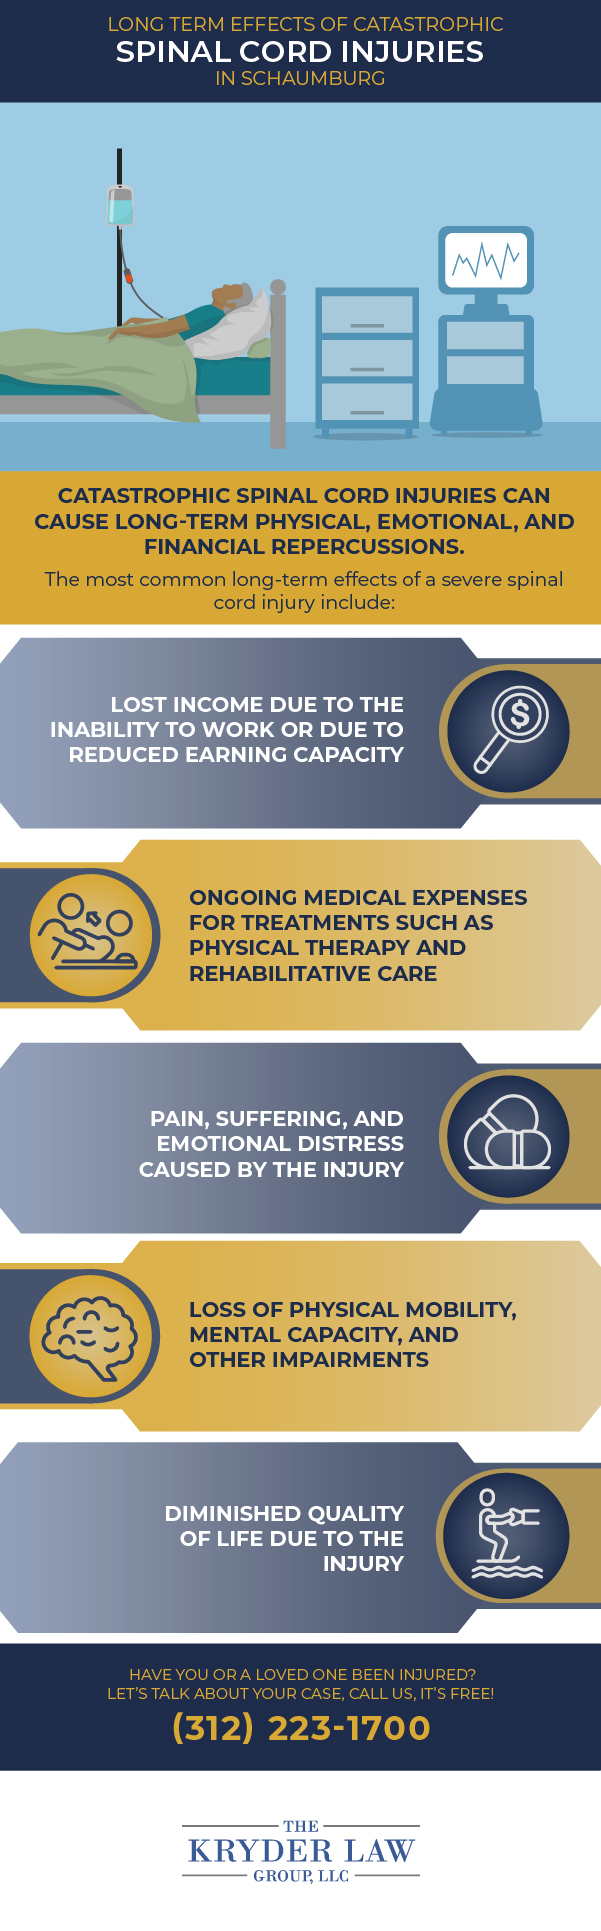 Long Term Effects of Catastrophic Spinal Cord Injuries in Schaumburg Infographic